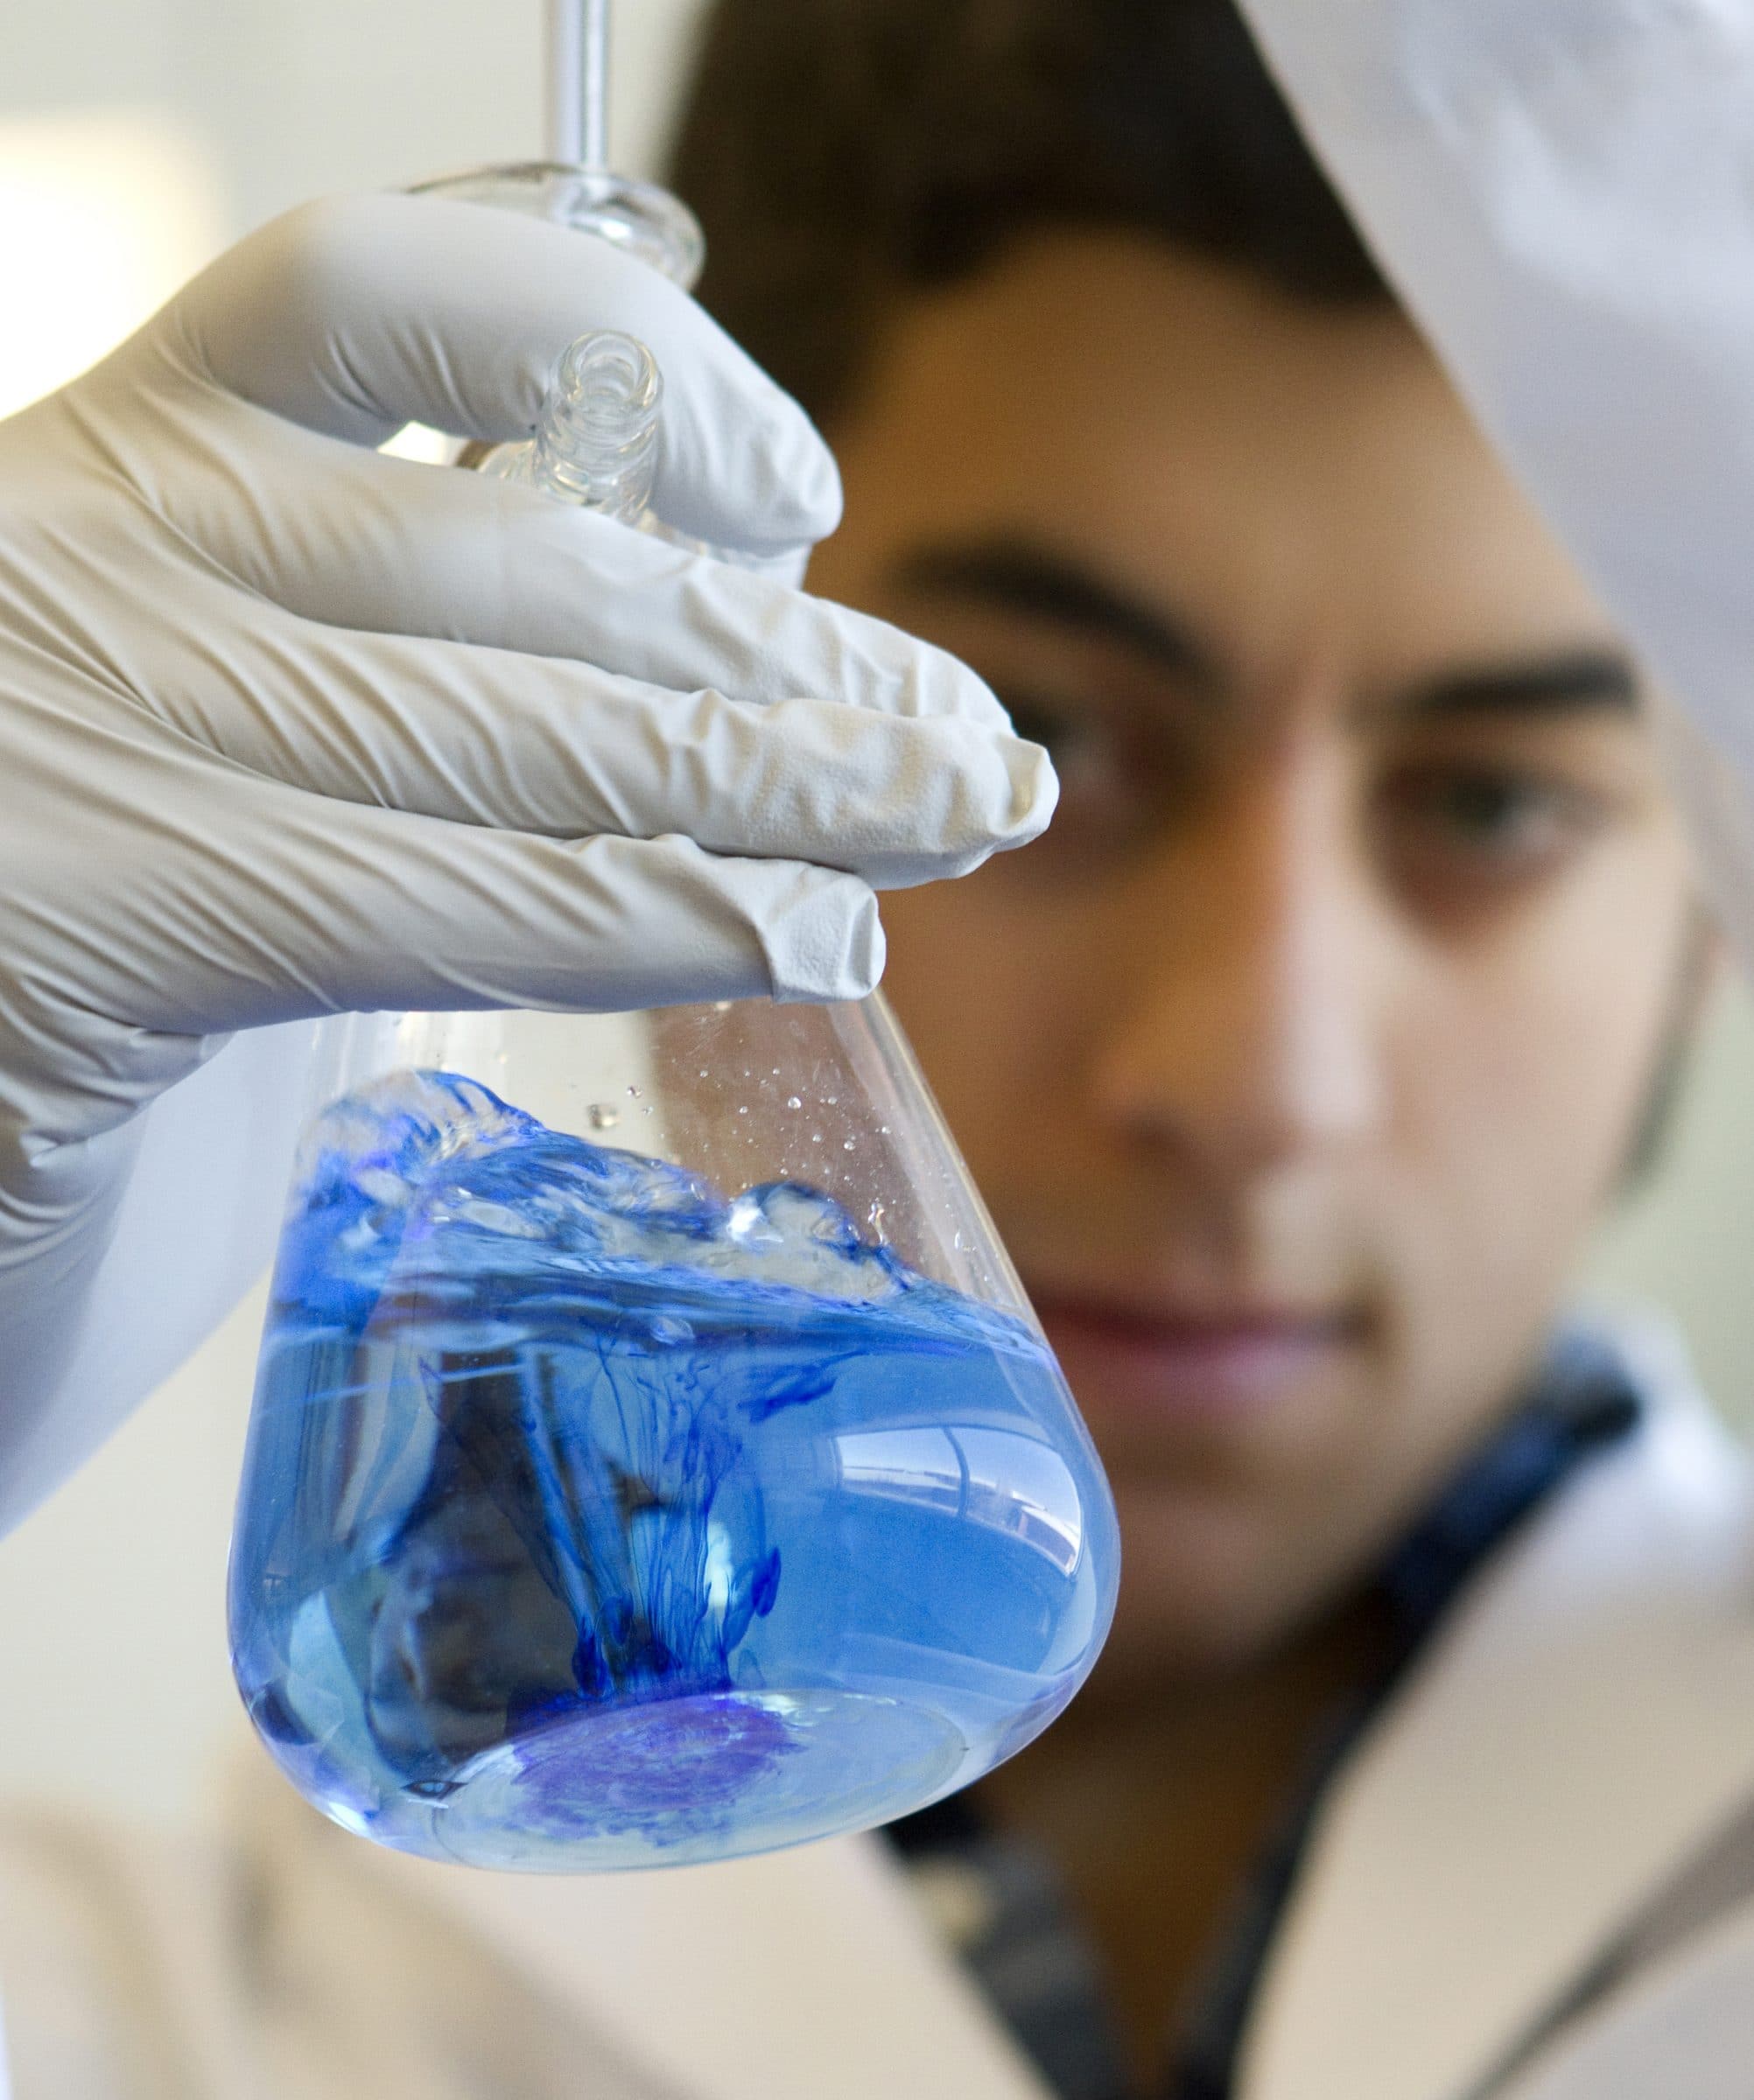 A student looking at a vial of blue liquid.